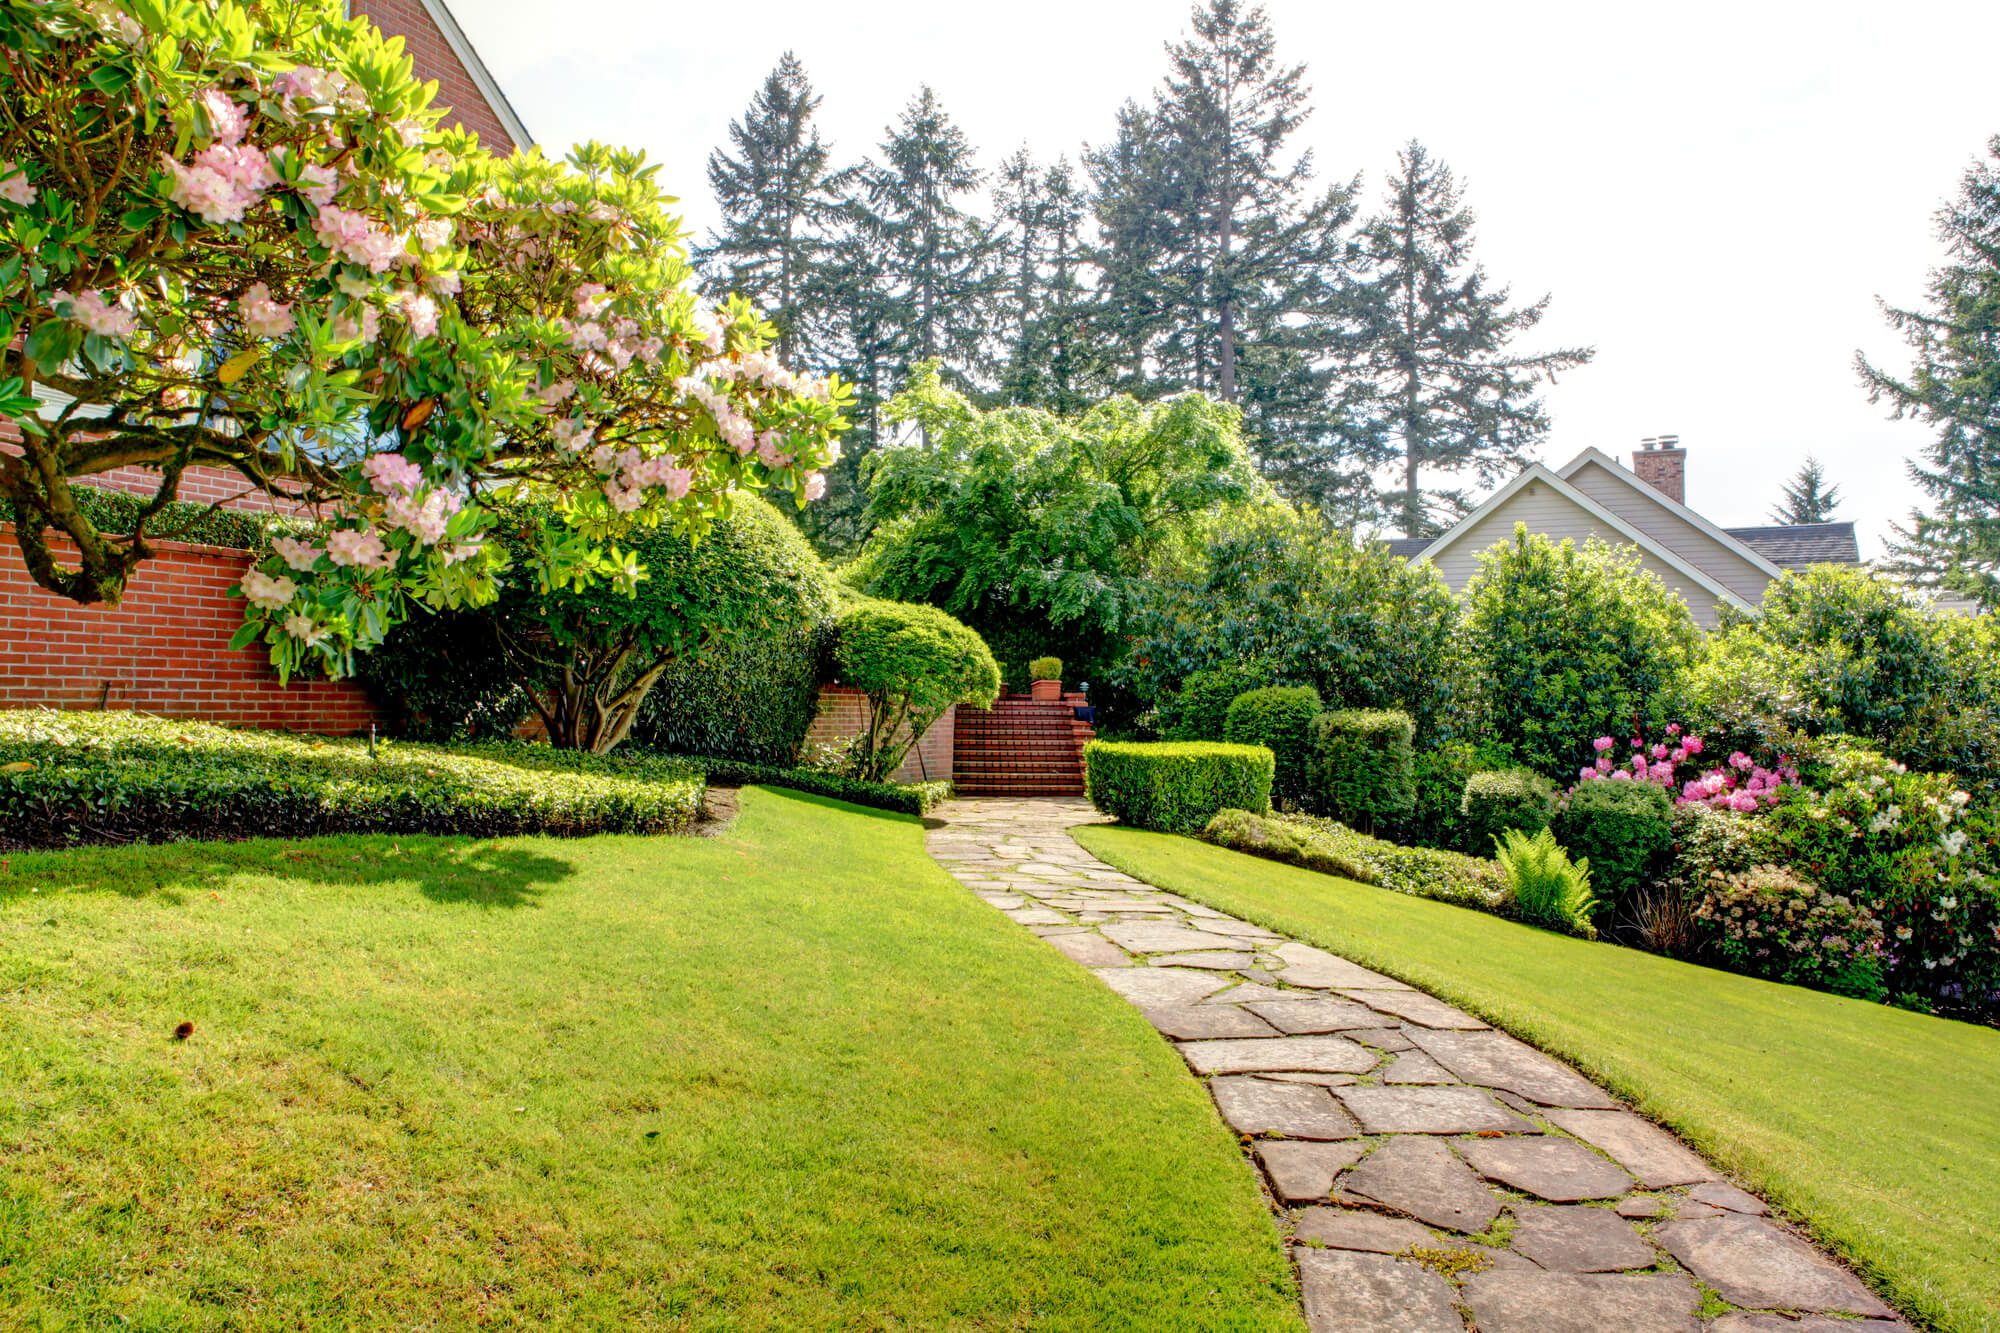 Landscaping services for homeowners in MD